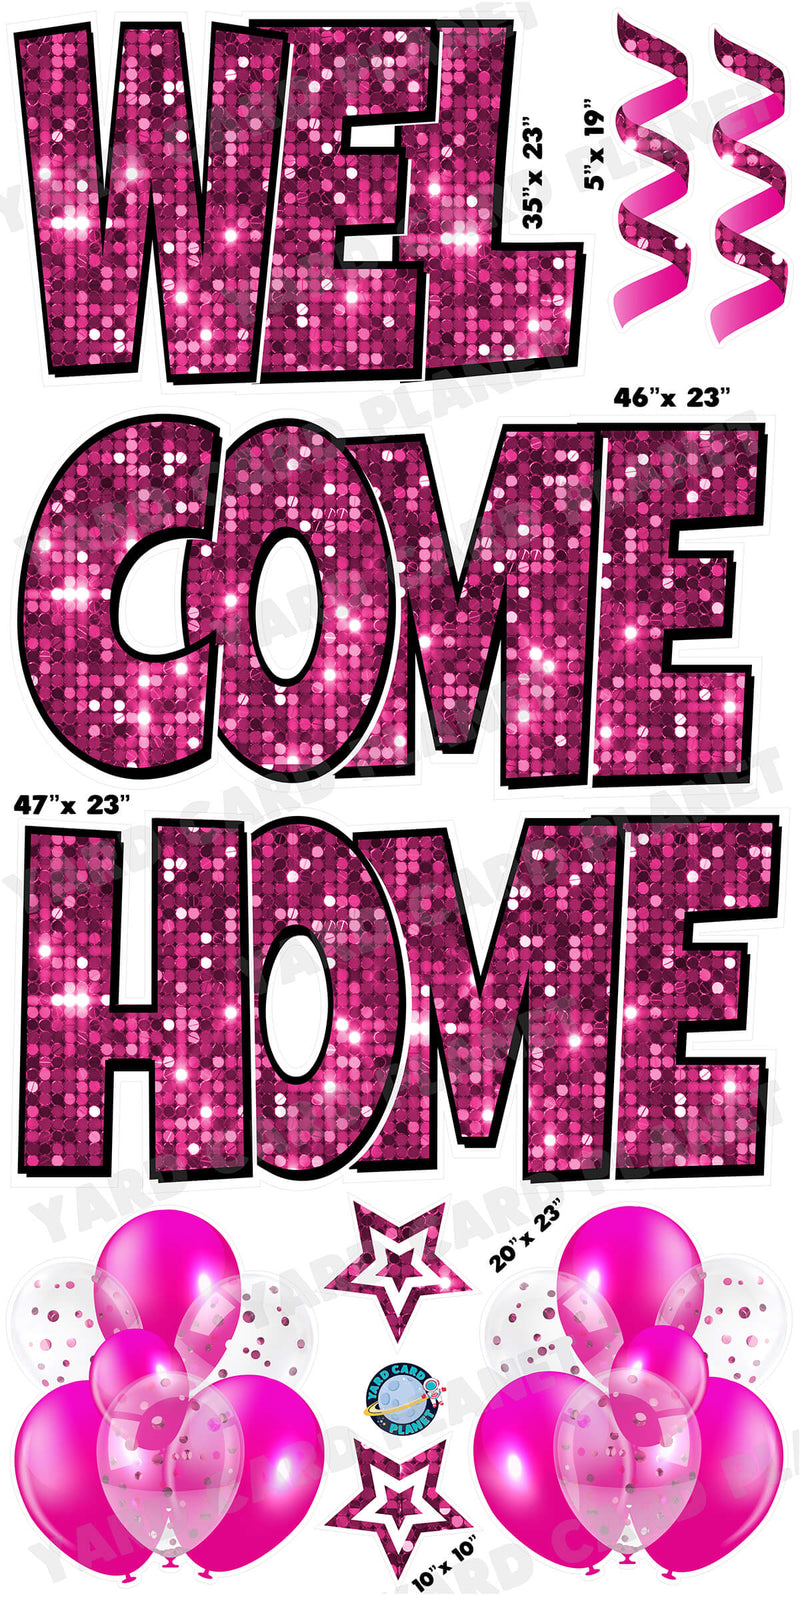 Large 23" Welcome Home Yard Card EZ Quick Sets in Luckiest Guy Font and Flair in Hot Pink Sequin Pattern